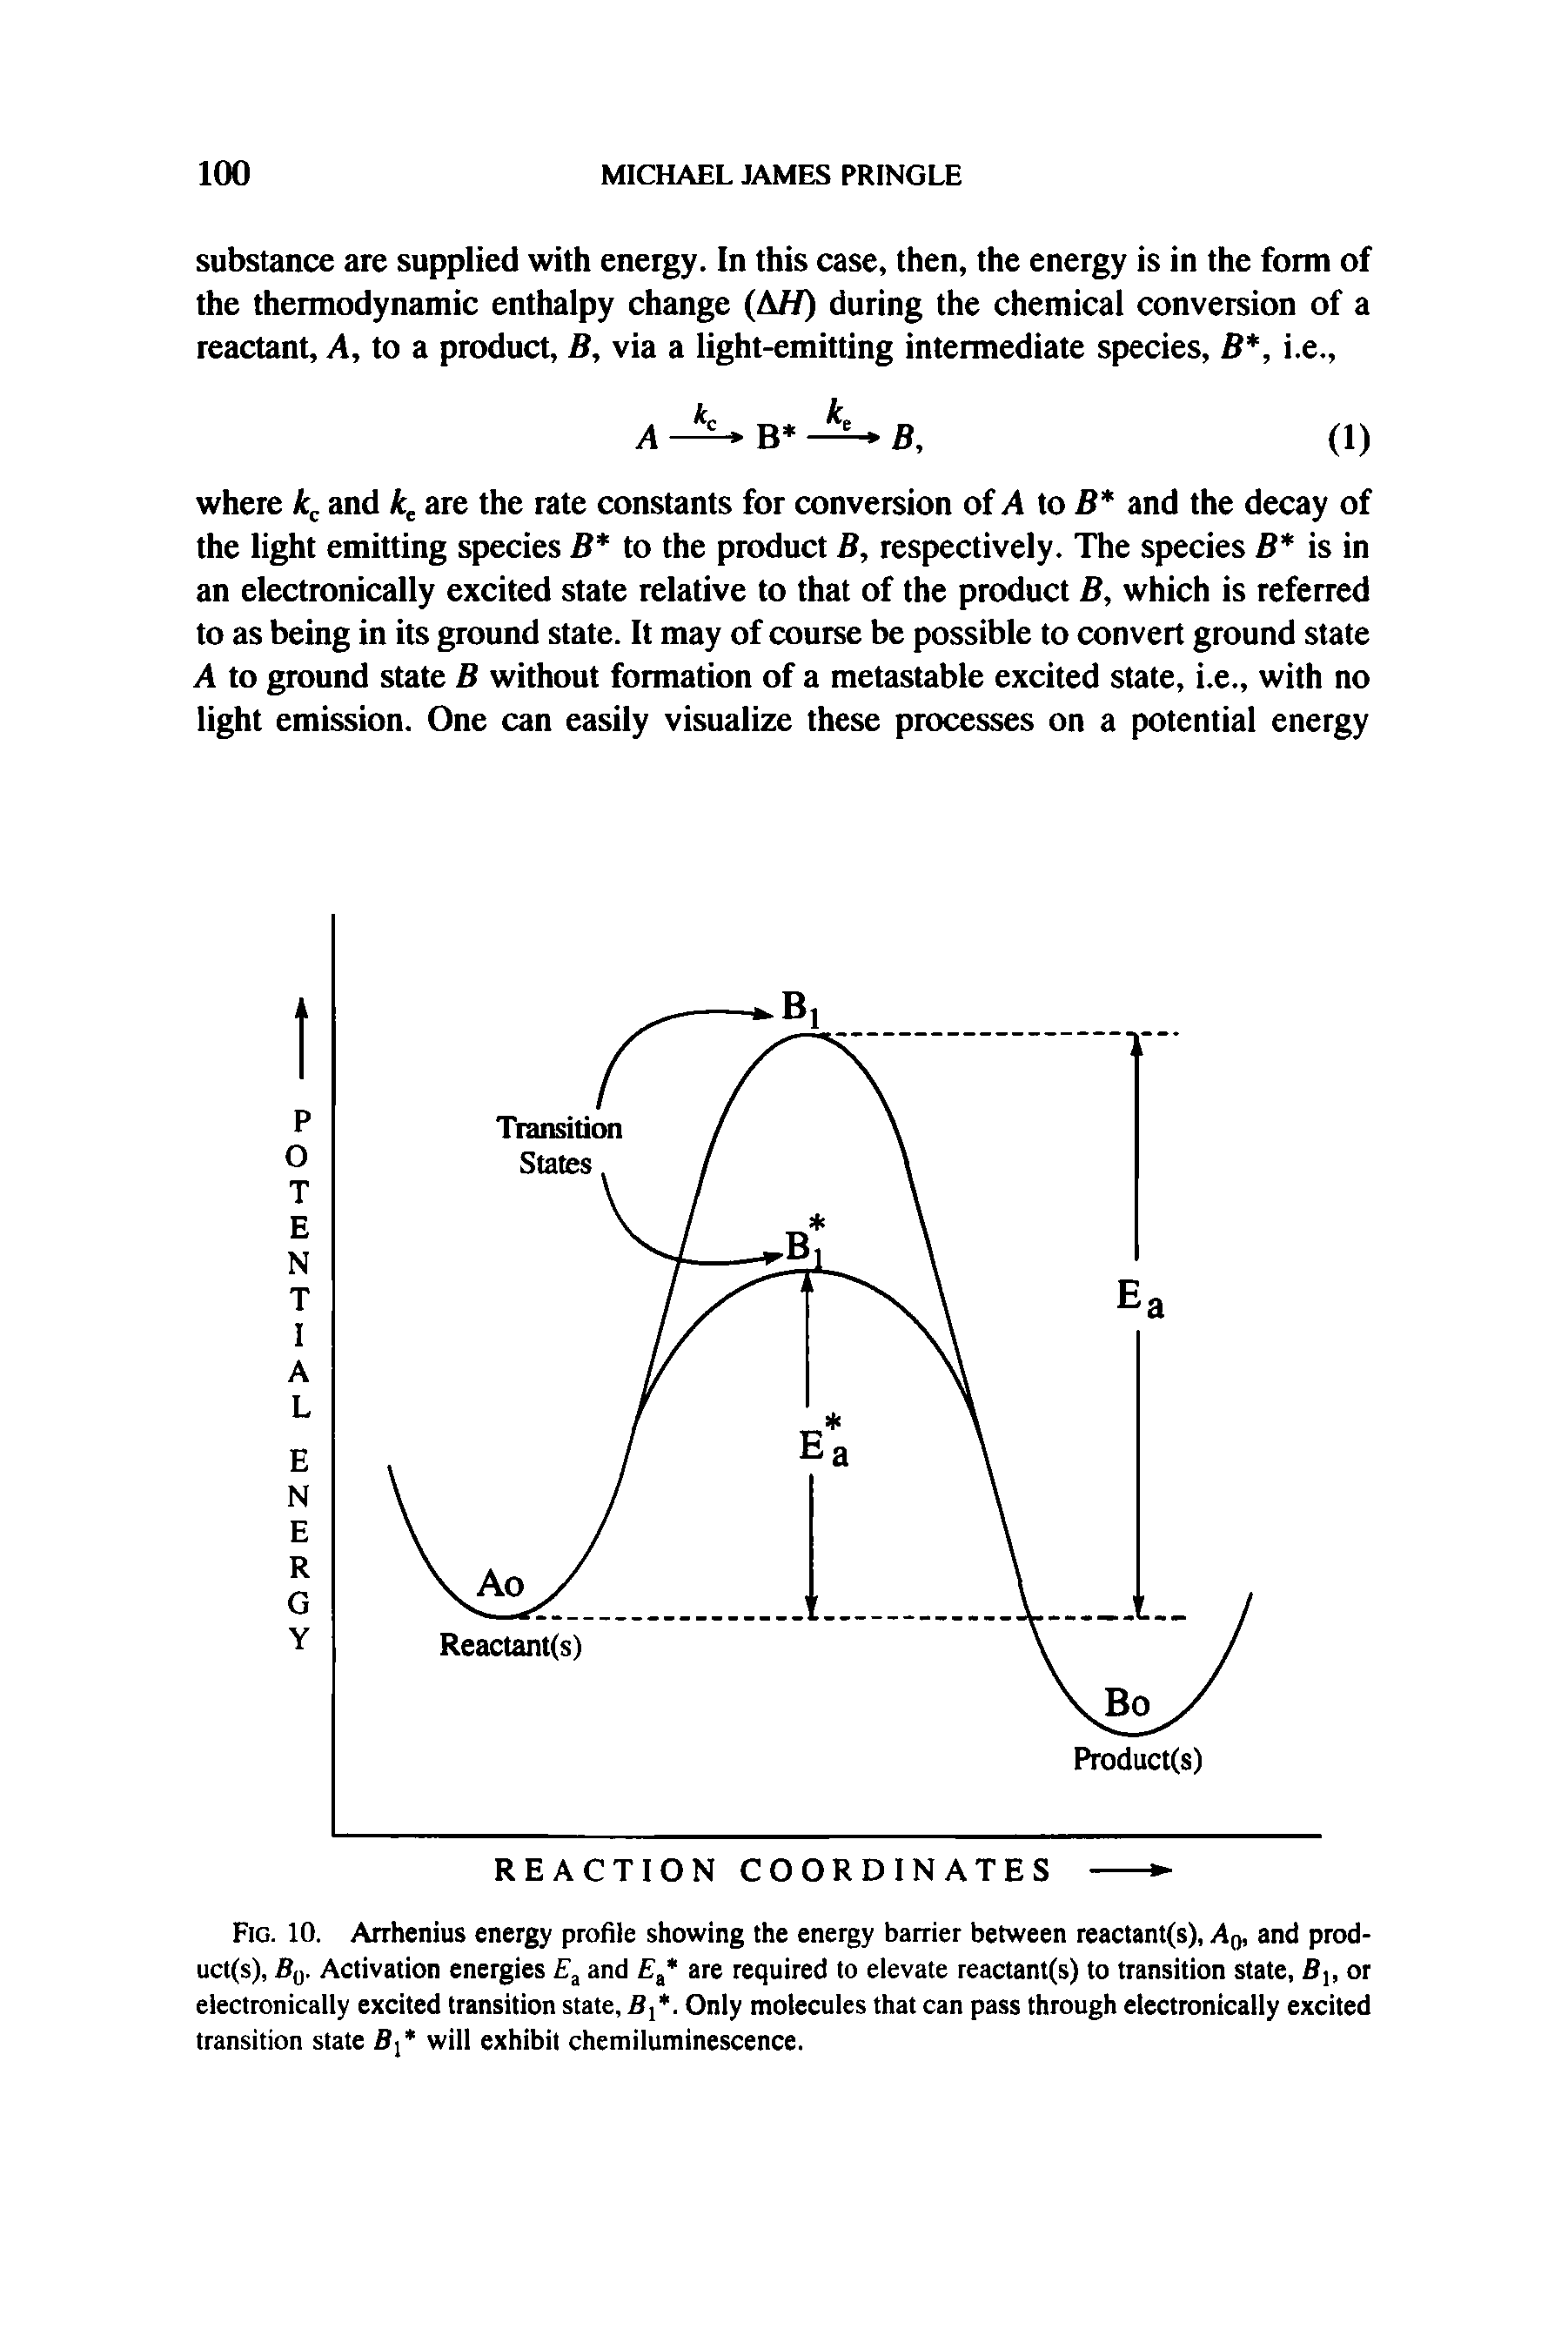 Fig. 10. Arrhenius energy profile showing the energy barrier between reactant(s), Ag, and prod-uct(s), By. Activation energies and E are required to elevate reactant(s) to transition state, Bj, or electronically excited transition state, Bj. Only molecules that can pass through electronically excited transition state Bj will exhibit chemiluminescence.